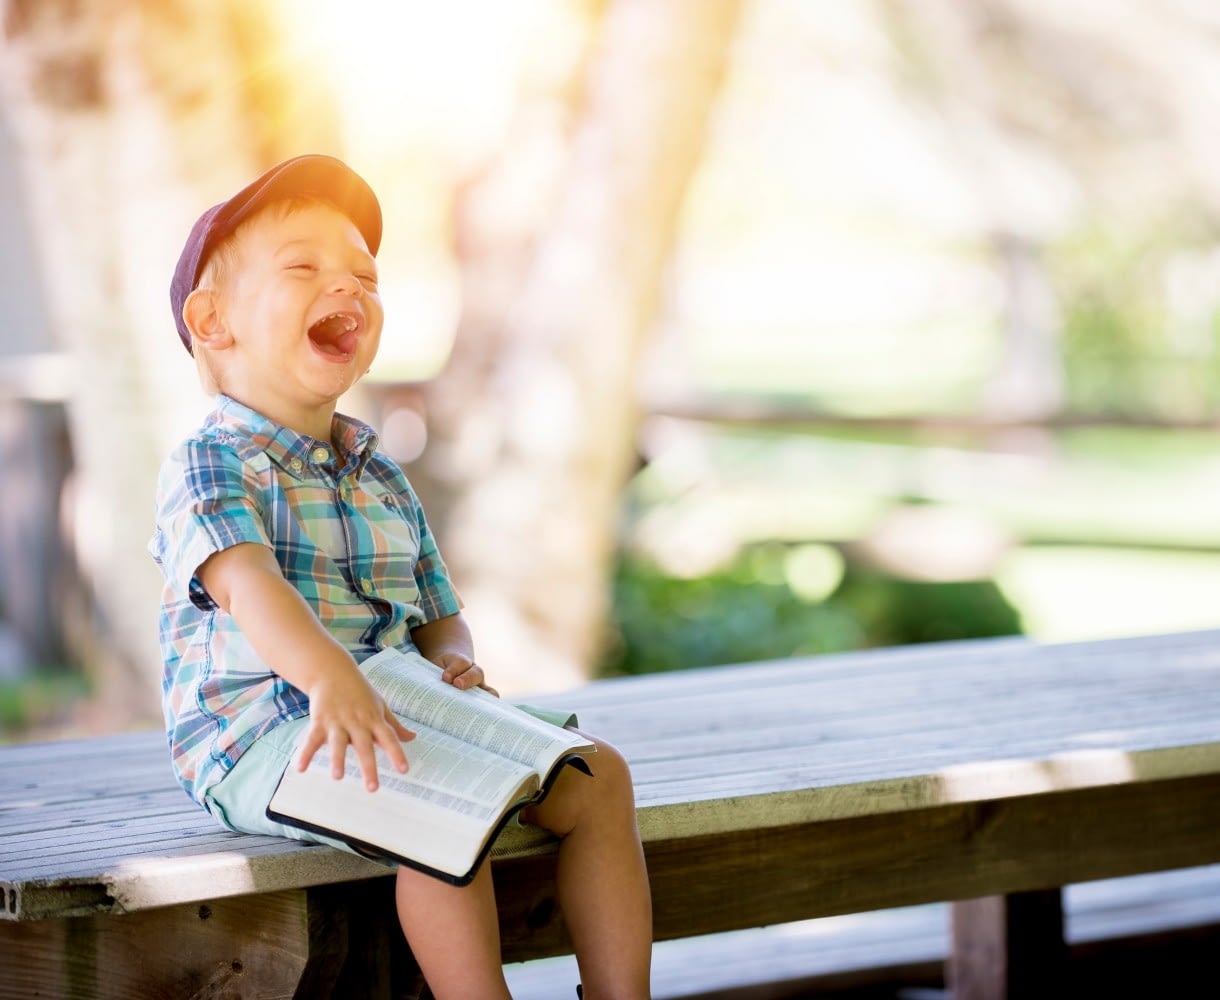 Smiling little boy sitting on a bench hold a book